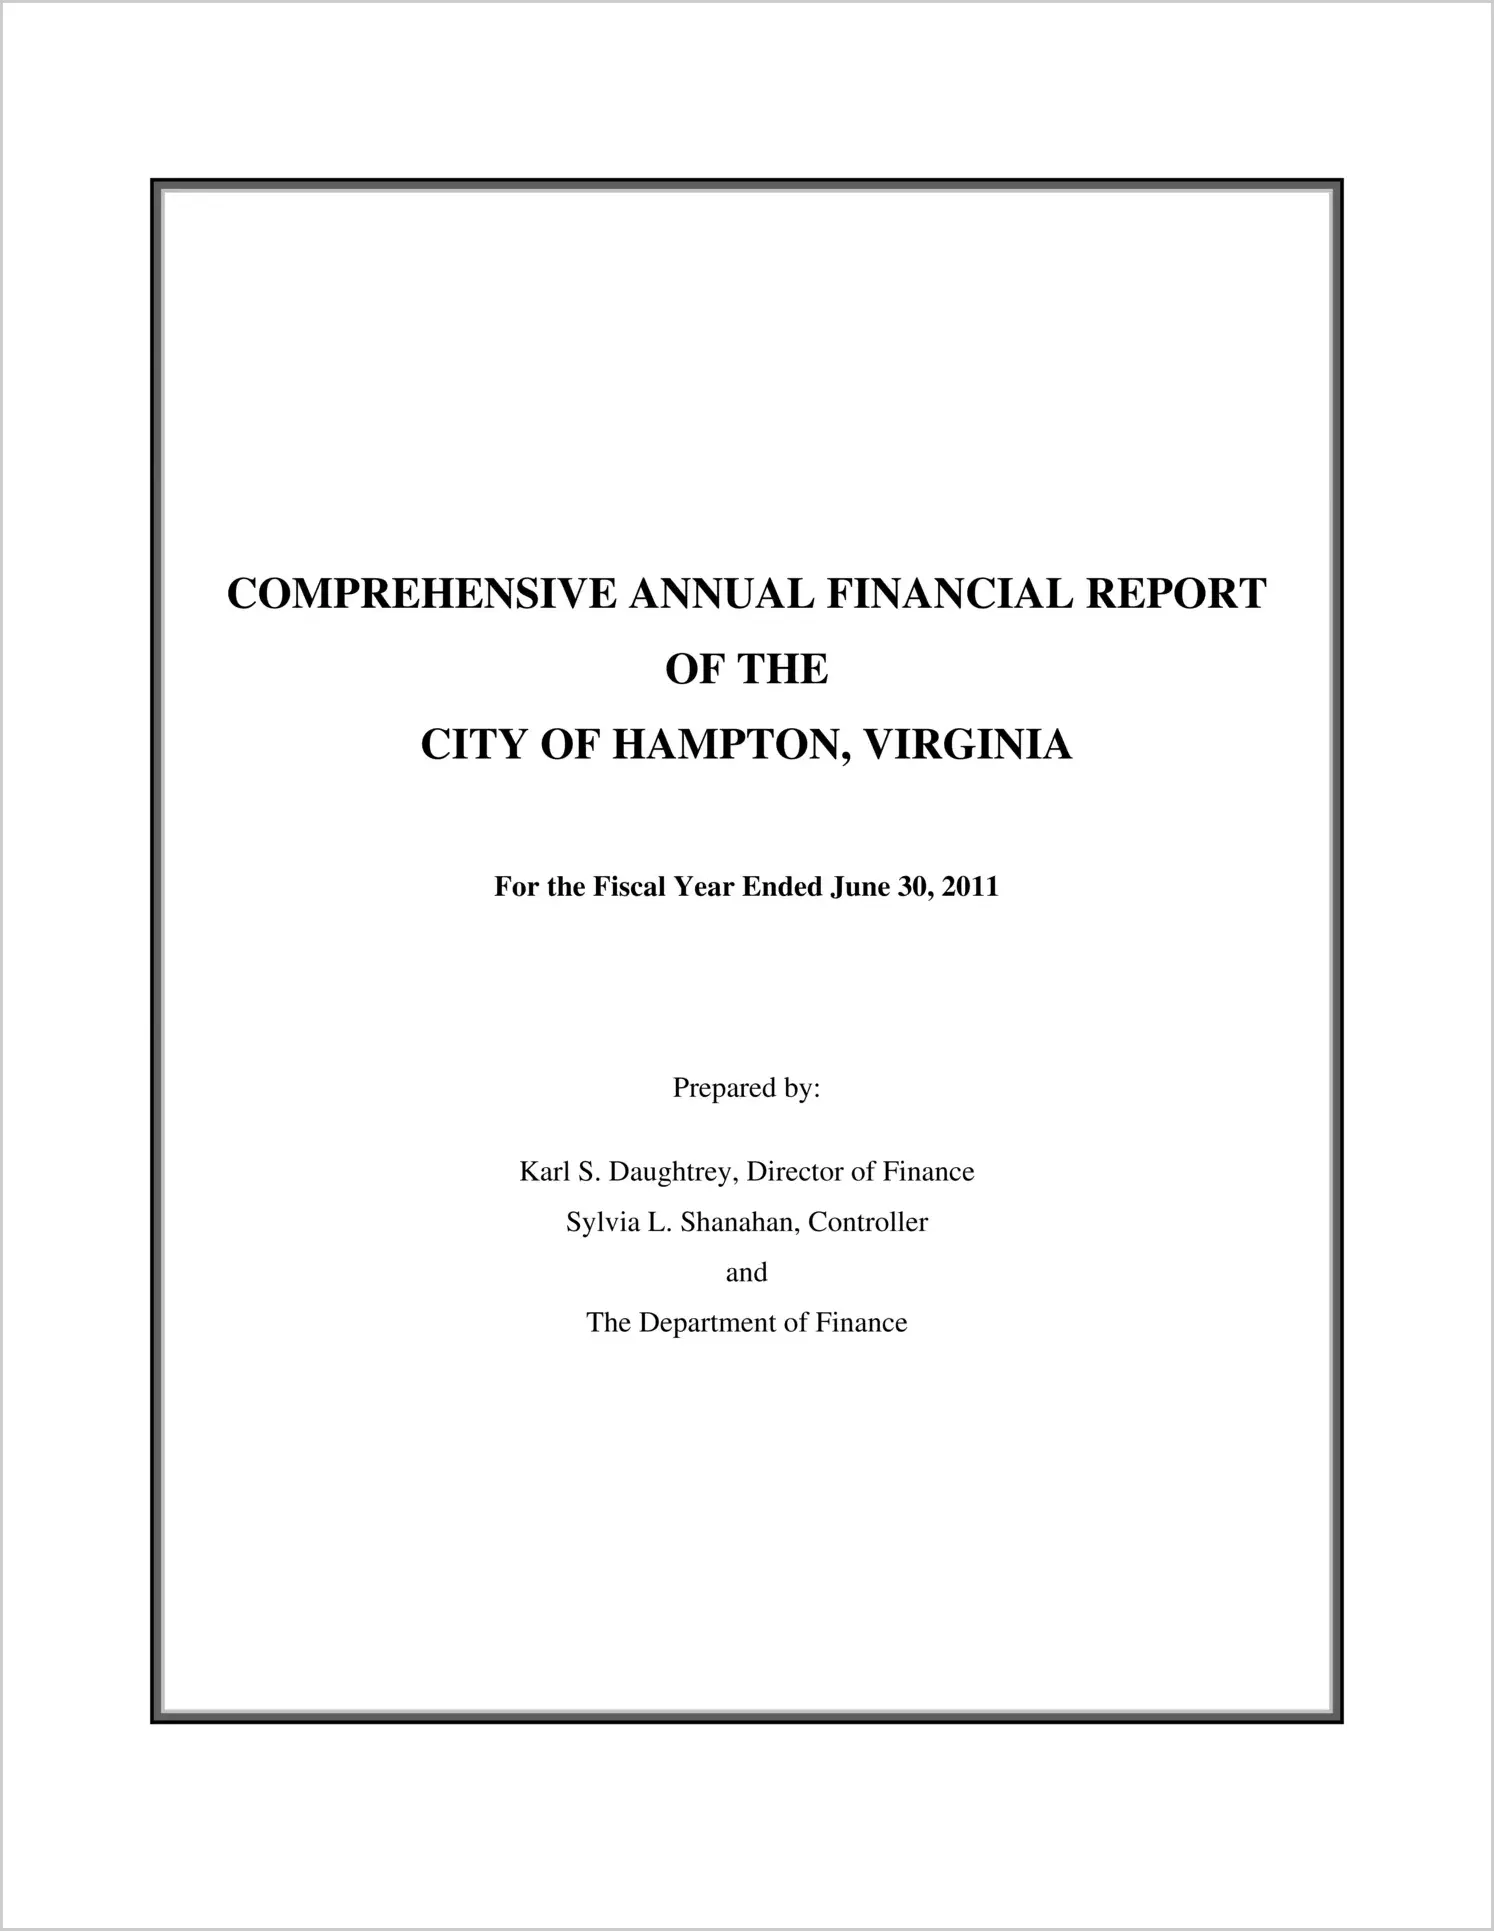 2010 Annual Financial Report for City of Hampton